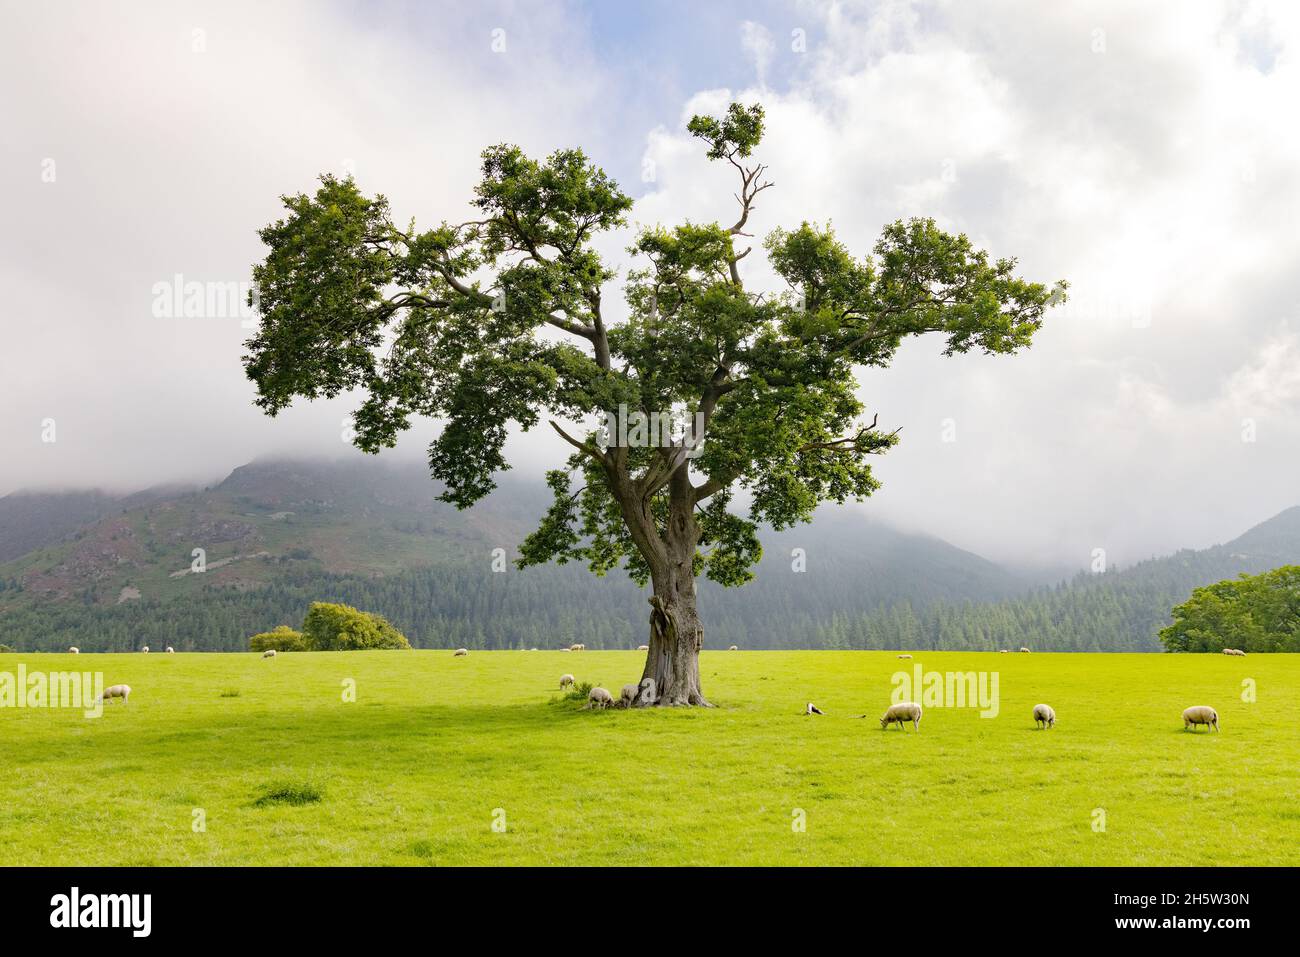 British countryside landscape - a single oak tree standing in a field with sheep grazing, Rydal, The Lake District, Cumbria UK Stock Photo